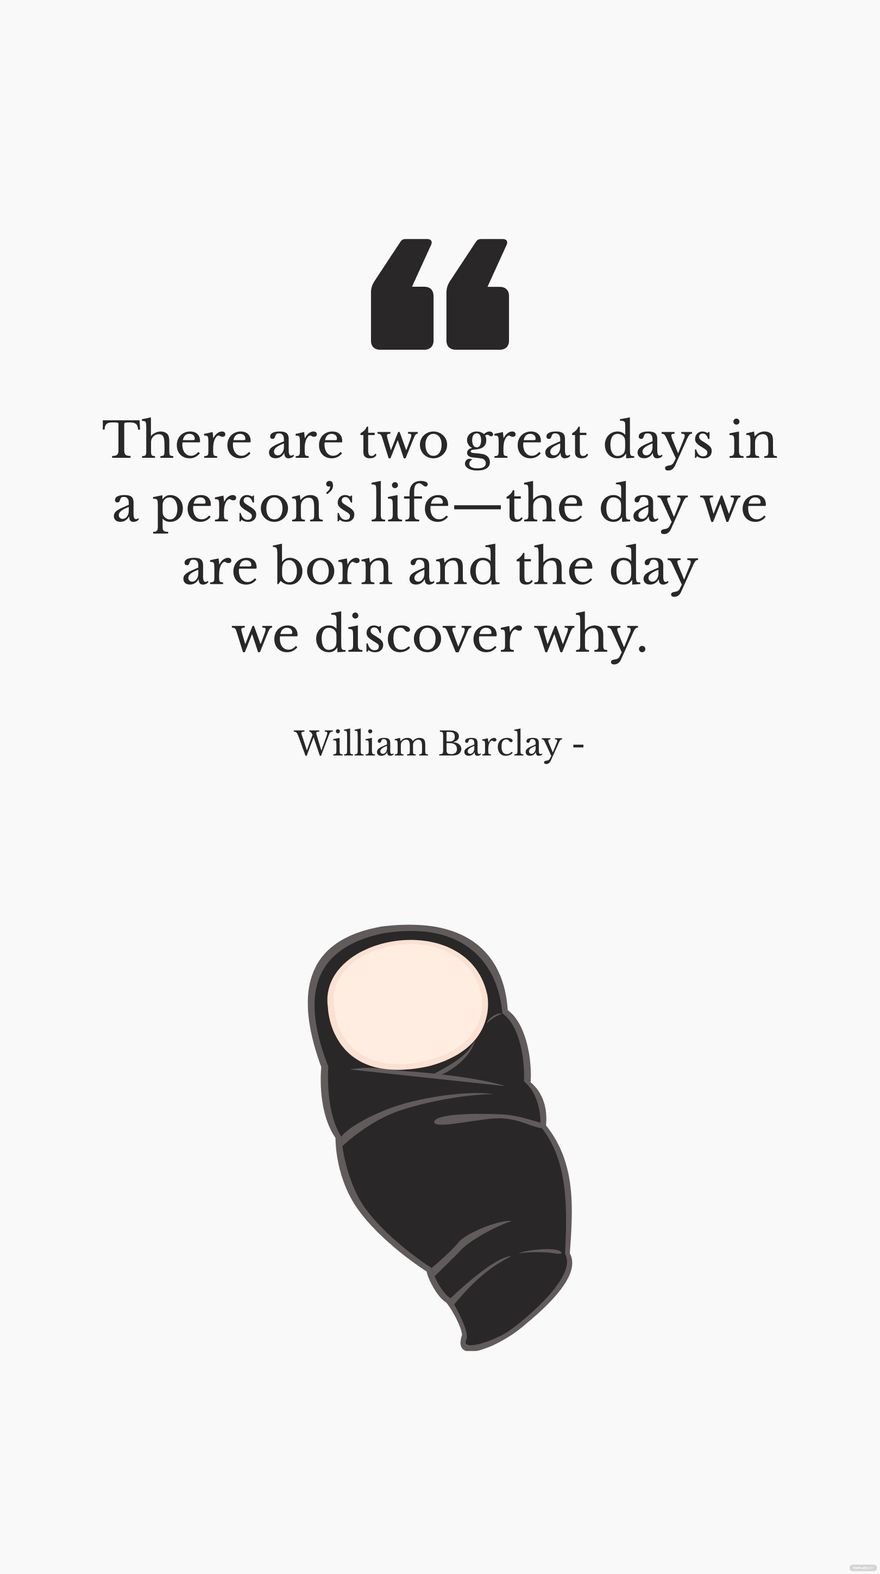 Free William Barclay - There are two great days in a person’s life—the day we are born and the day we discover why. in JPG